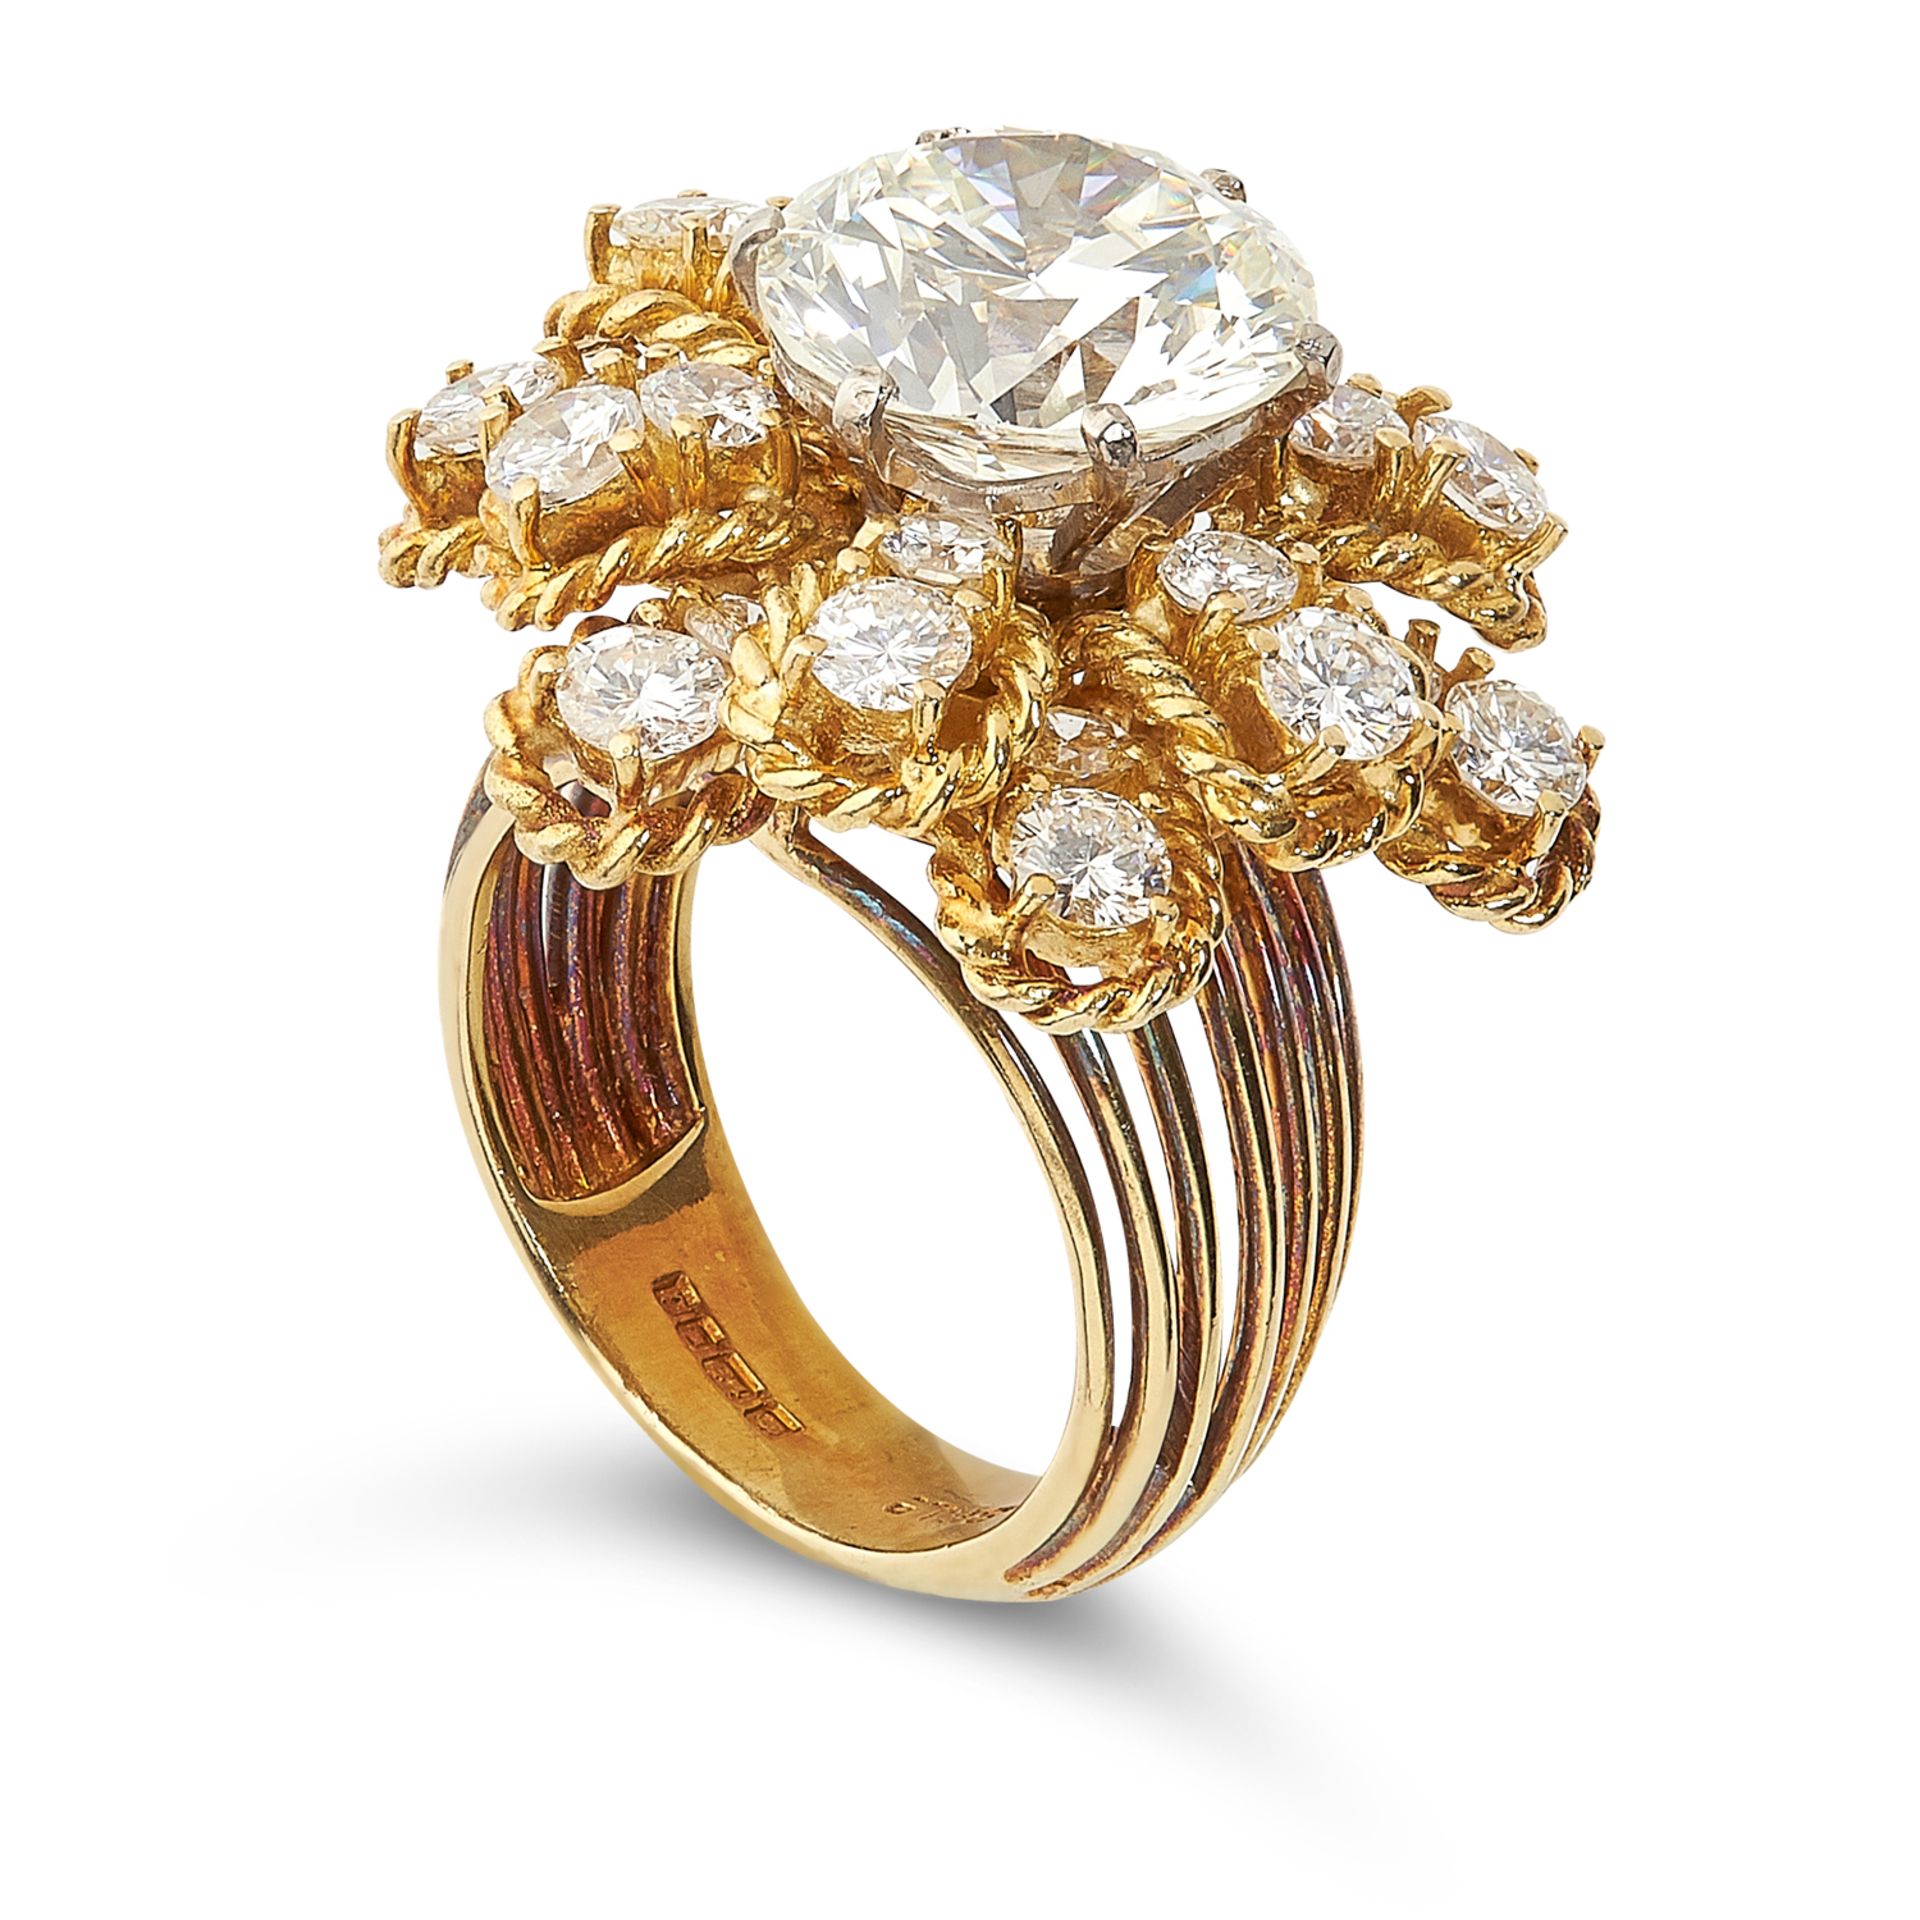 A VINTAGE 4.76 CARAT DIAMOND RING, BEN ROSENFELD 1964 in 18ct yellow gold, set with a central - Image 3 of 4